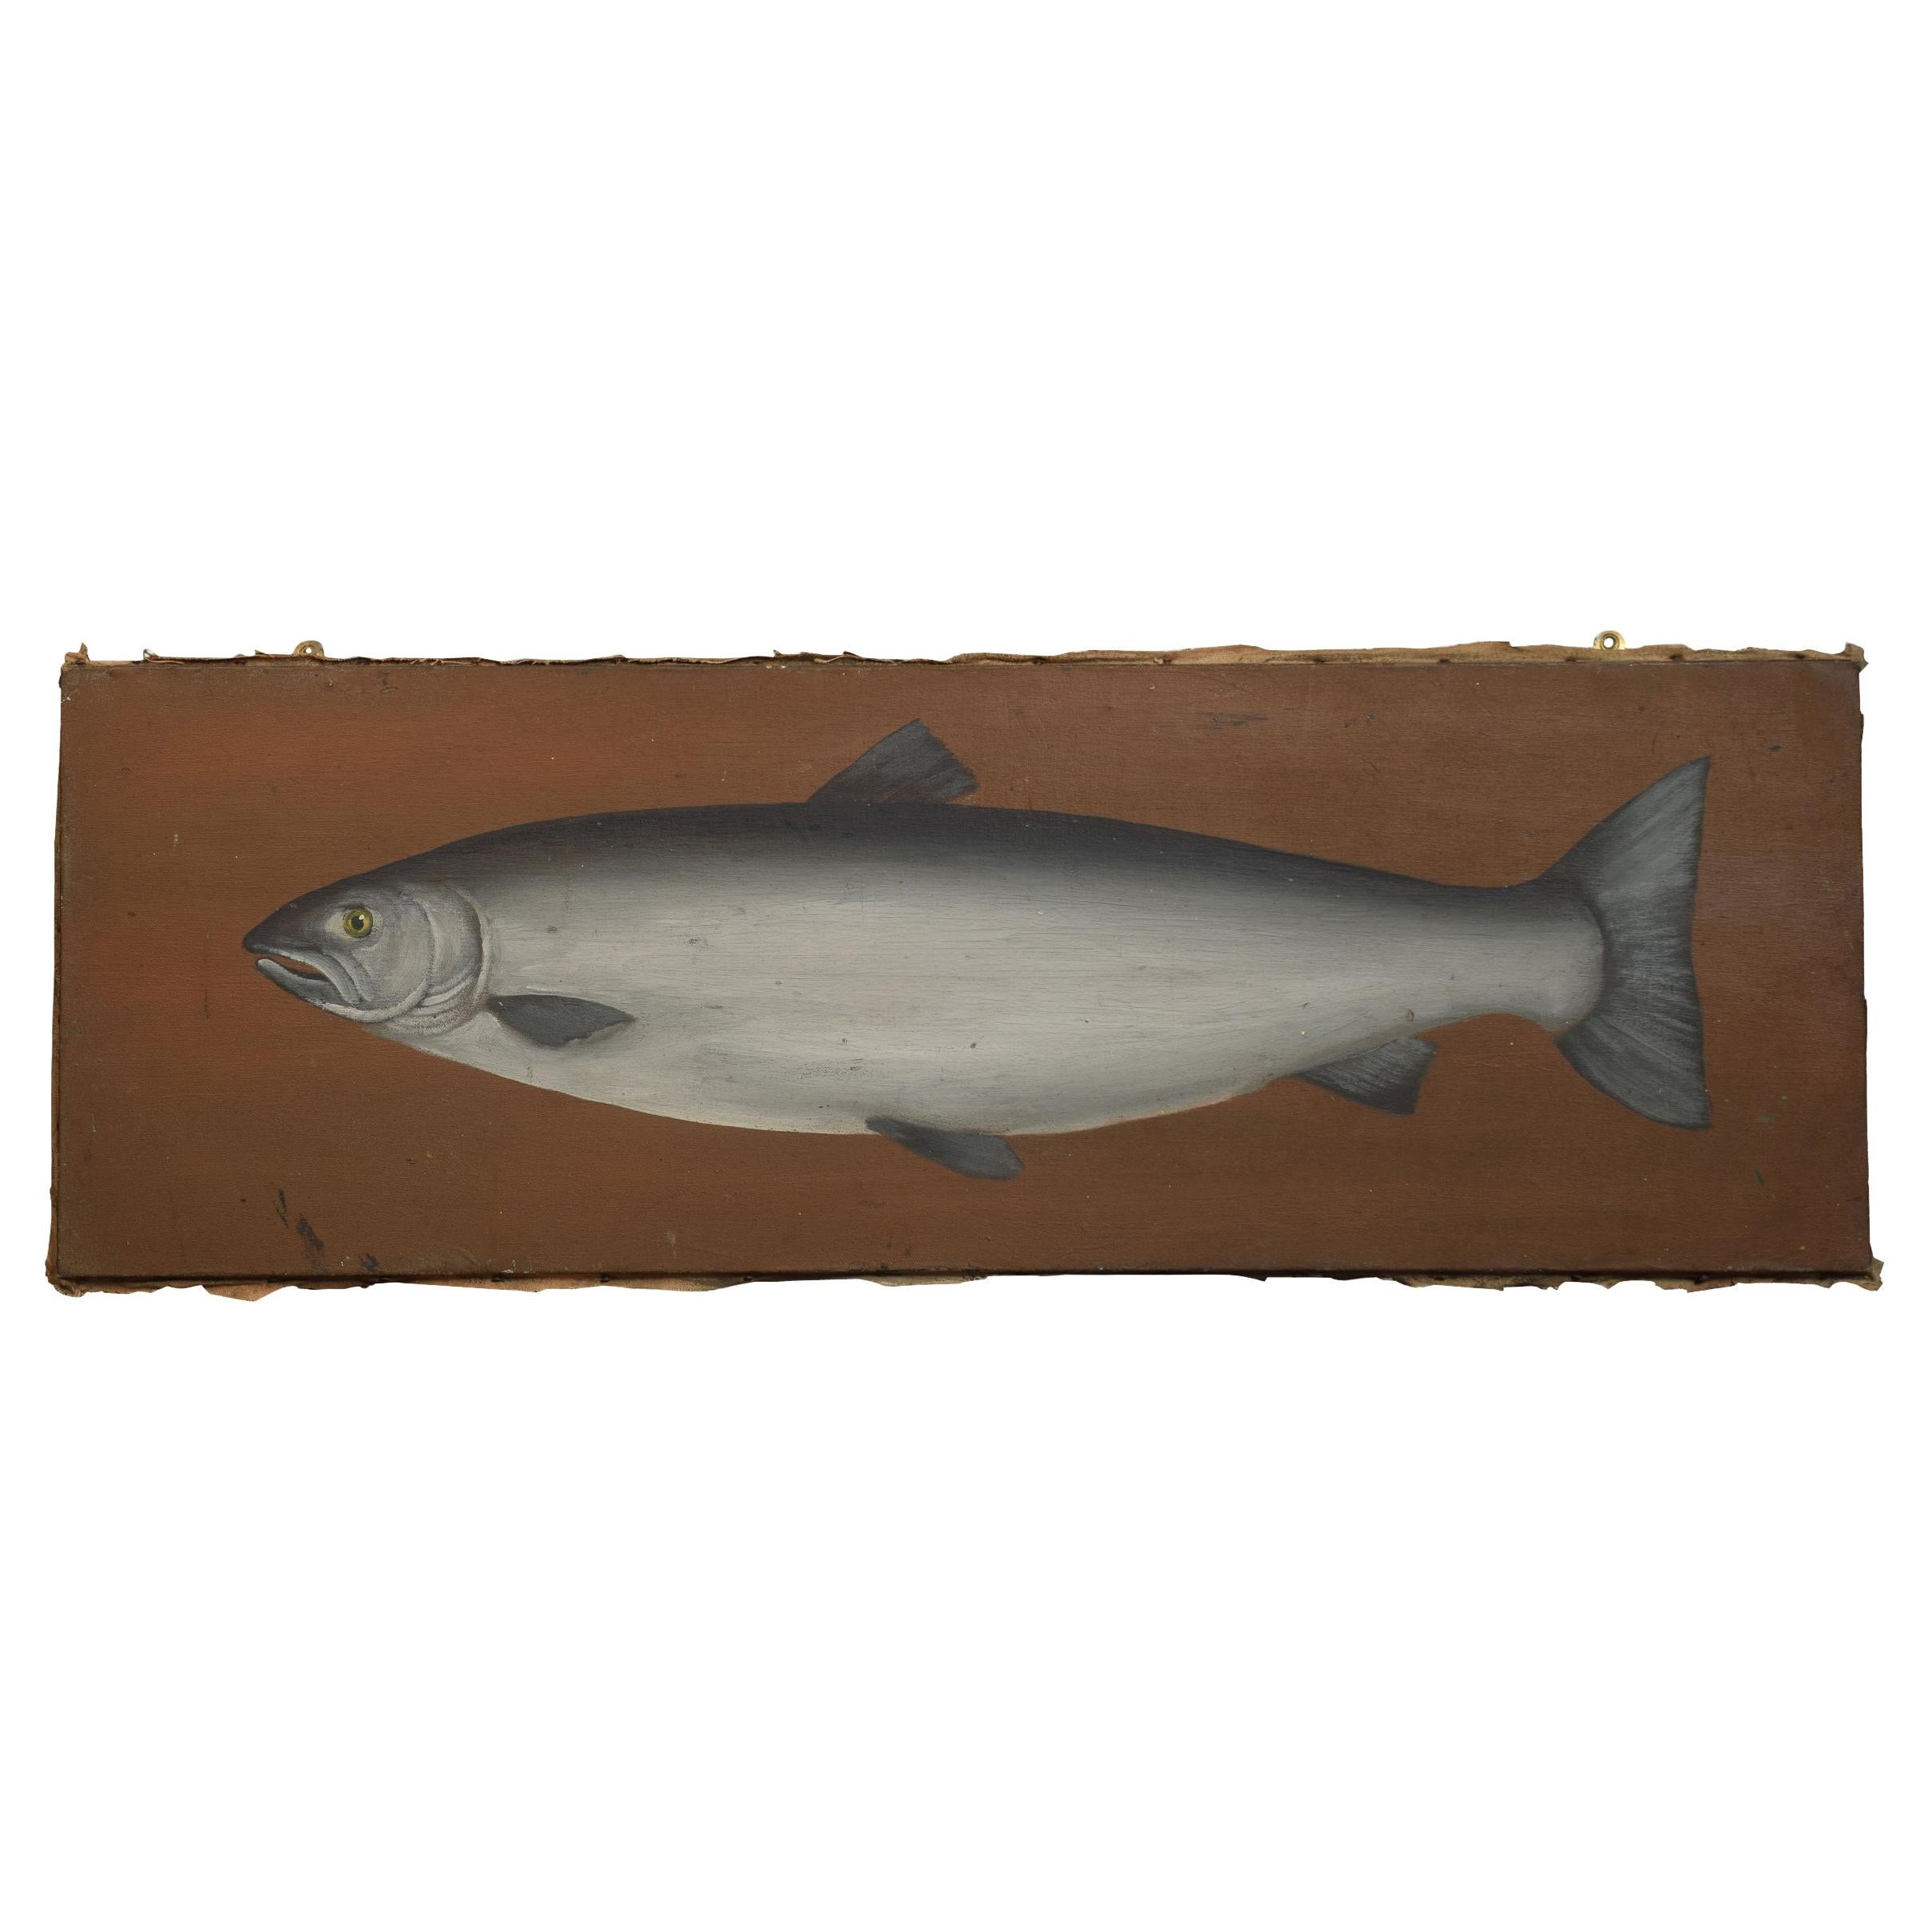 Oil on Canvas Study of a Salmon